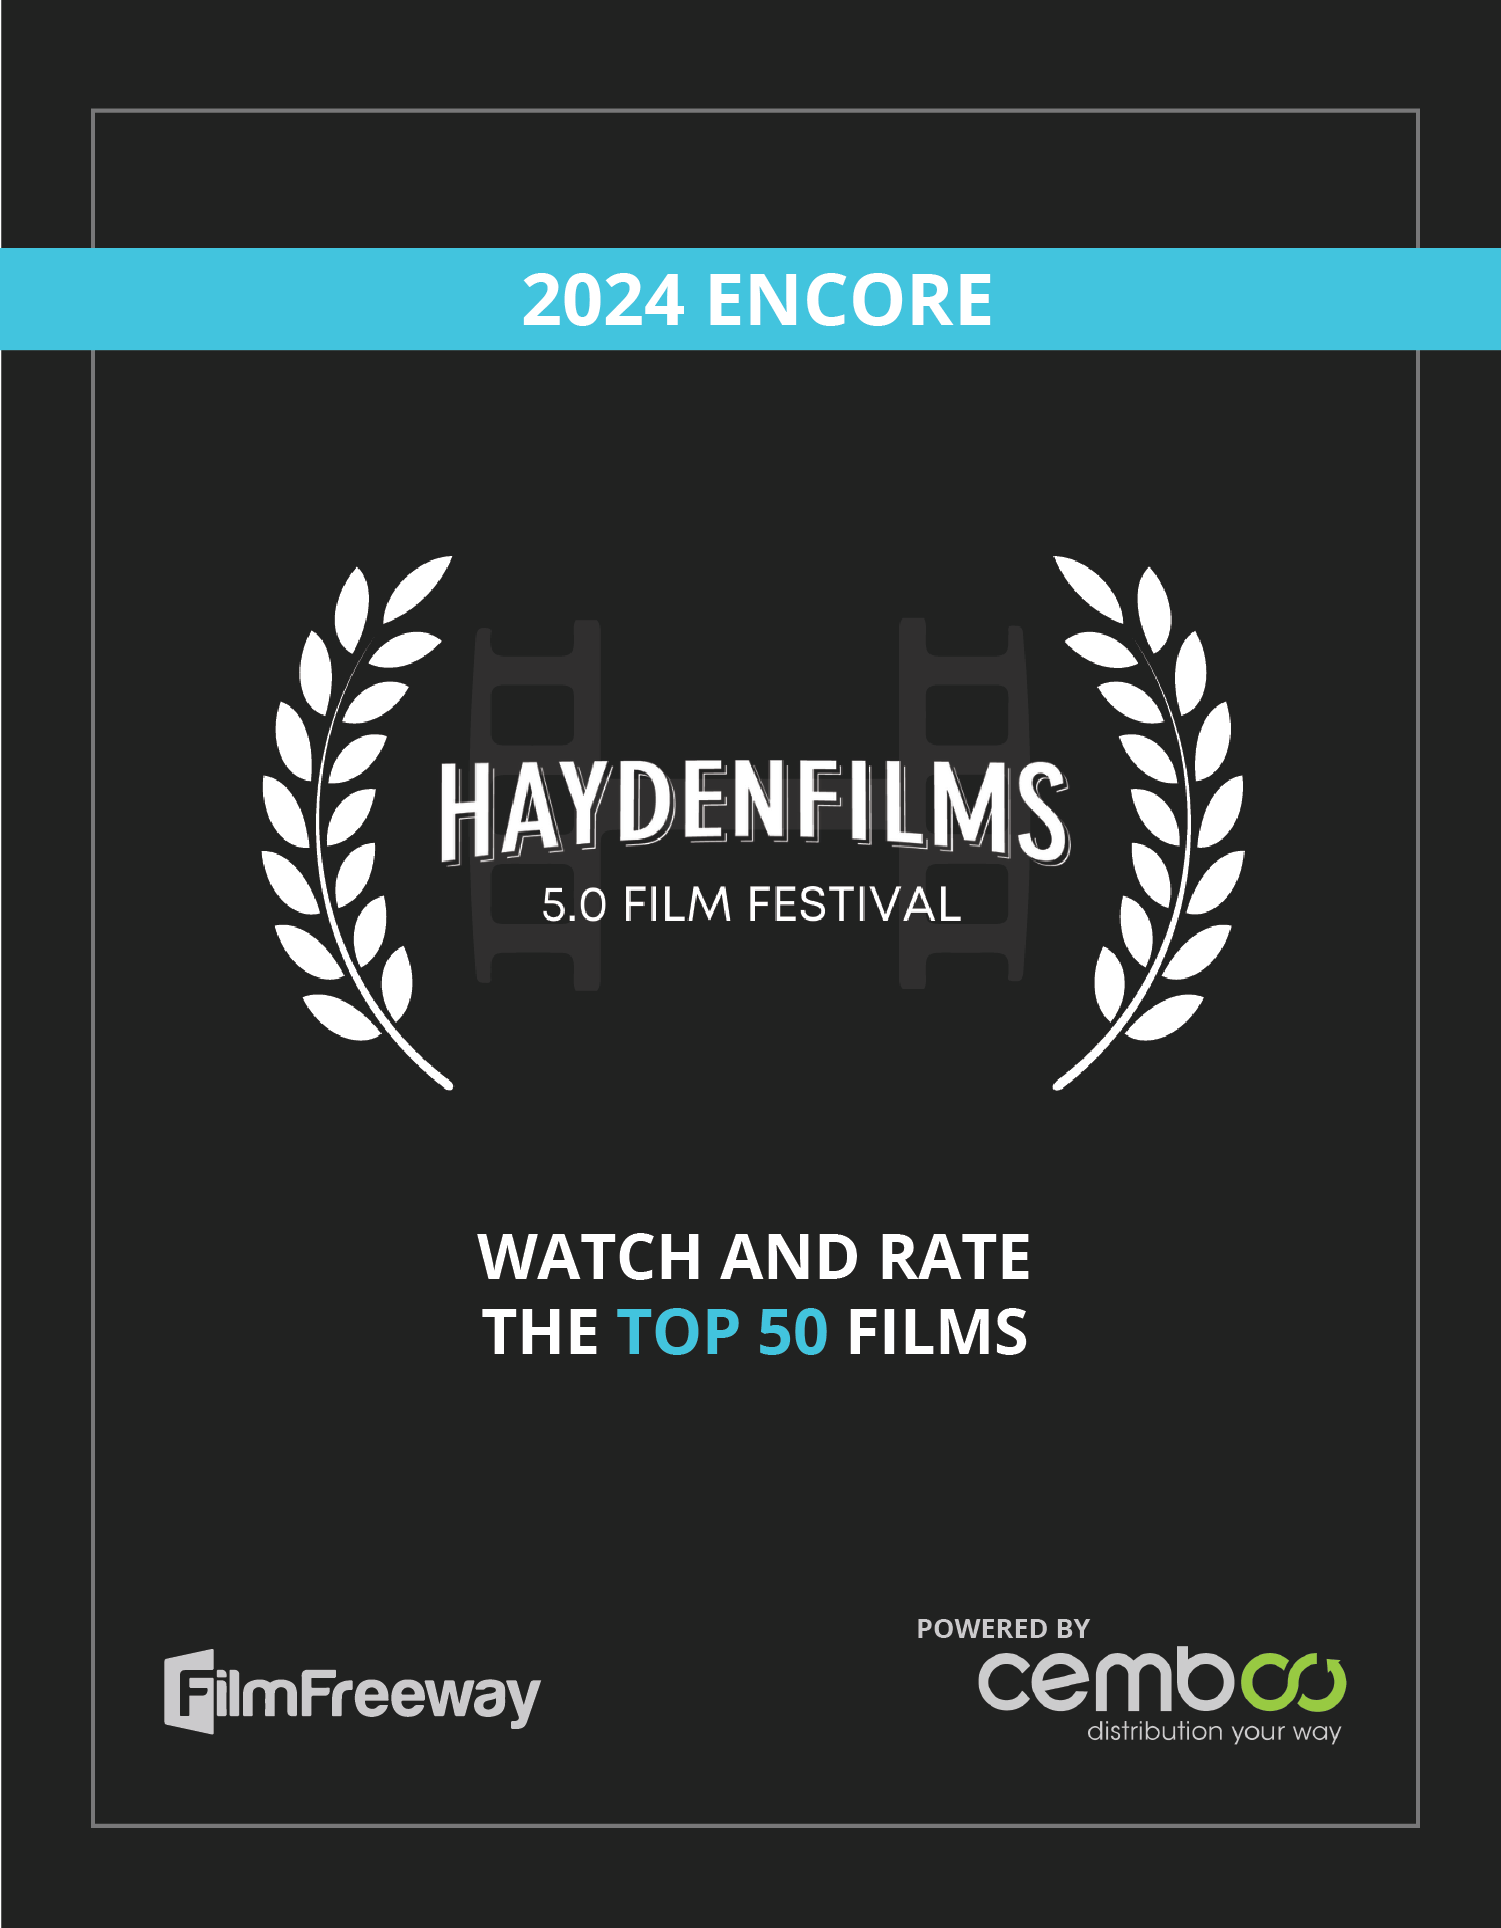 Watch and Rate the Top 50 Films